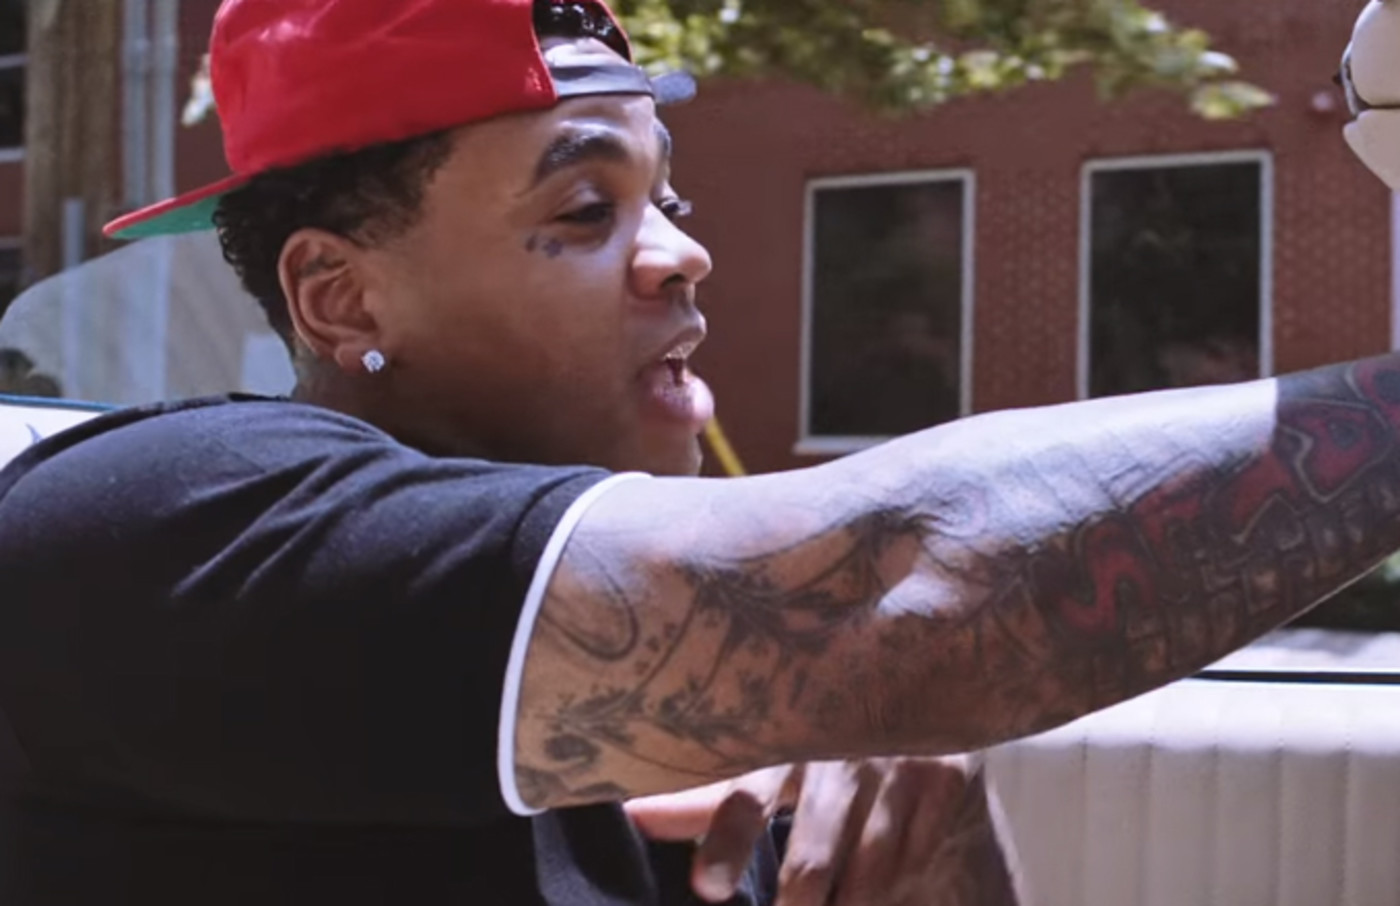 Kevin gates - seattle song